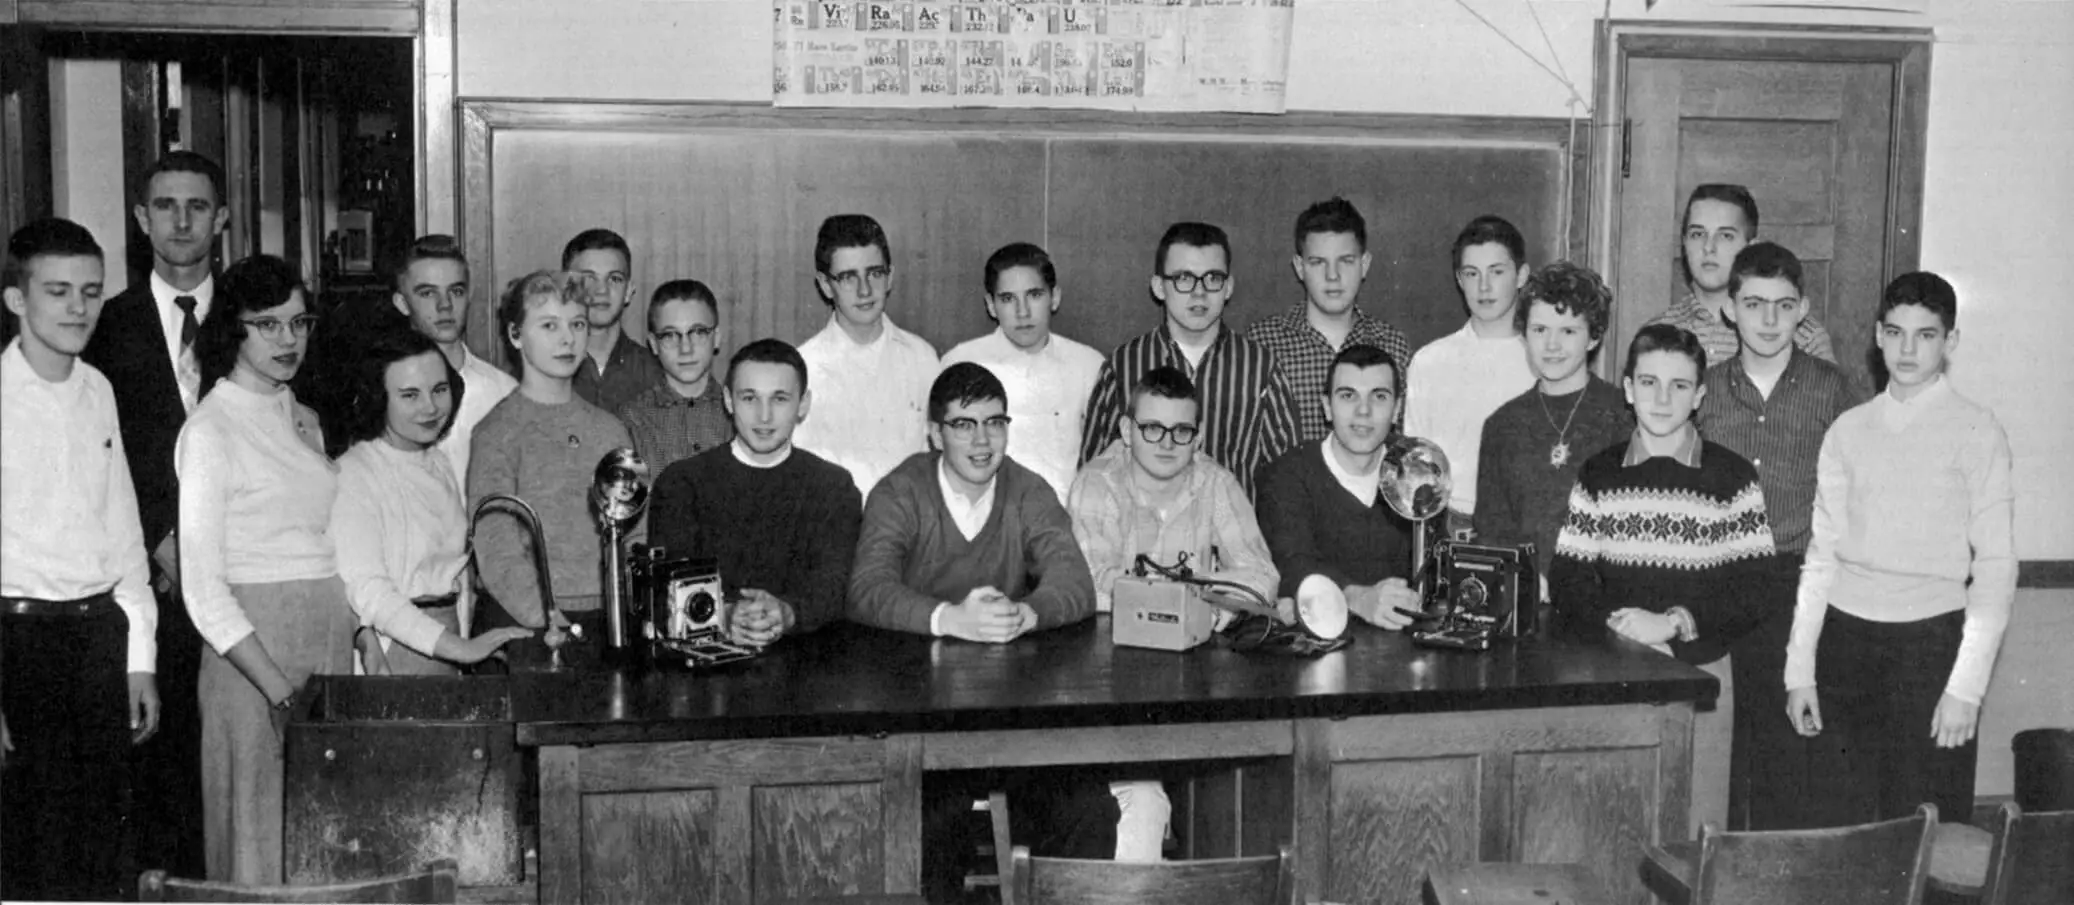 Black and white photo of a group of 22 young men and women in high school, as they pose with cameras.